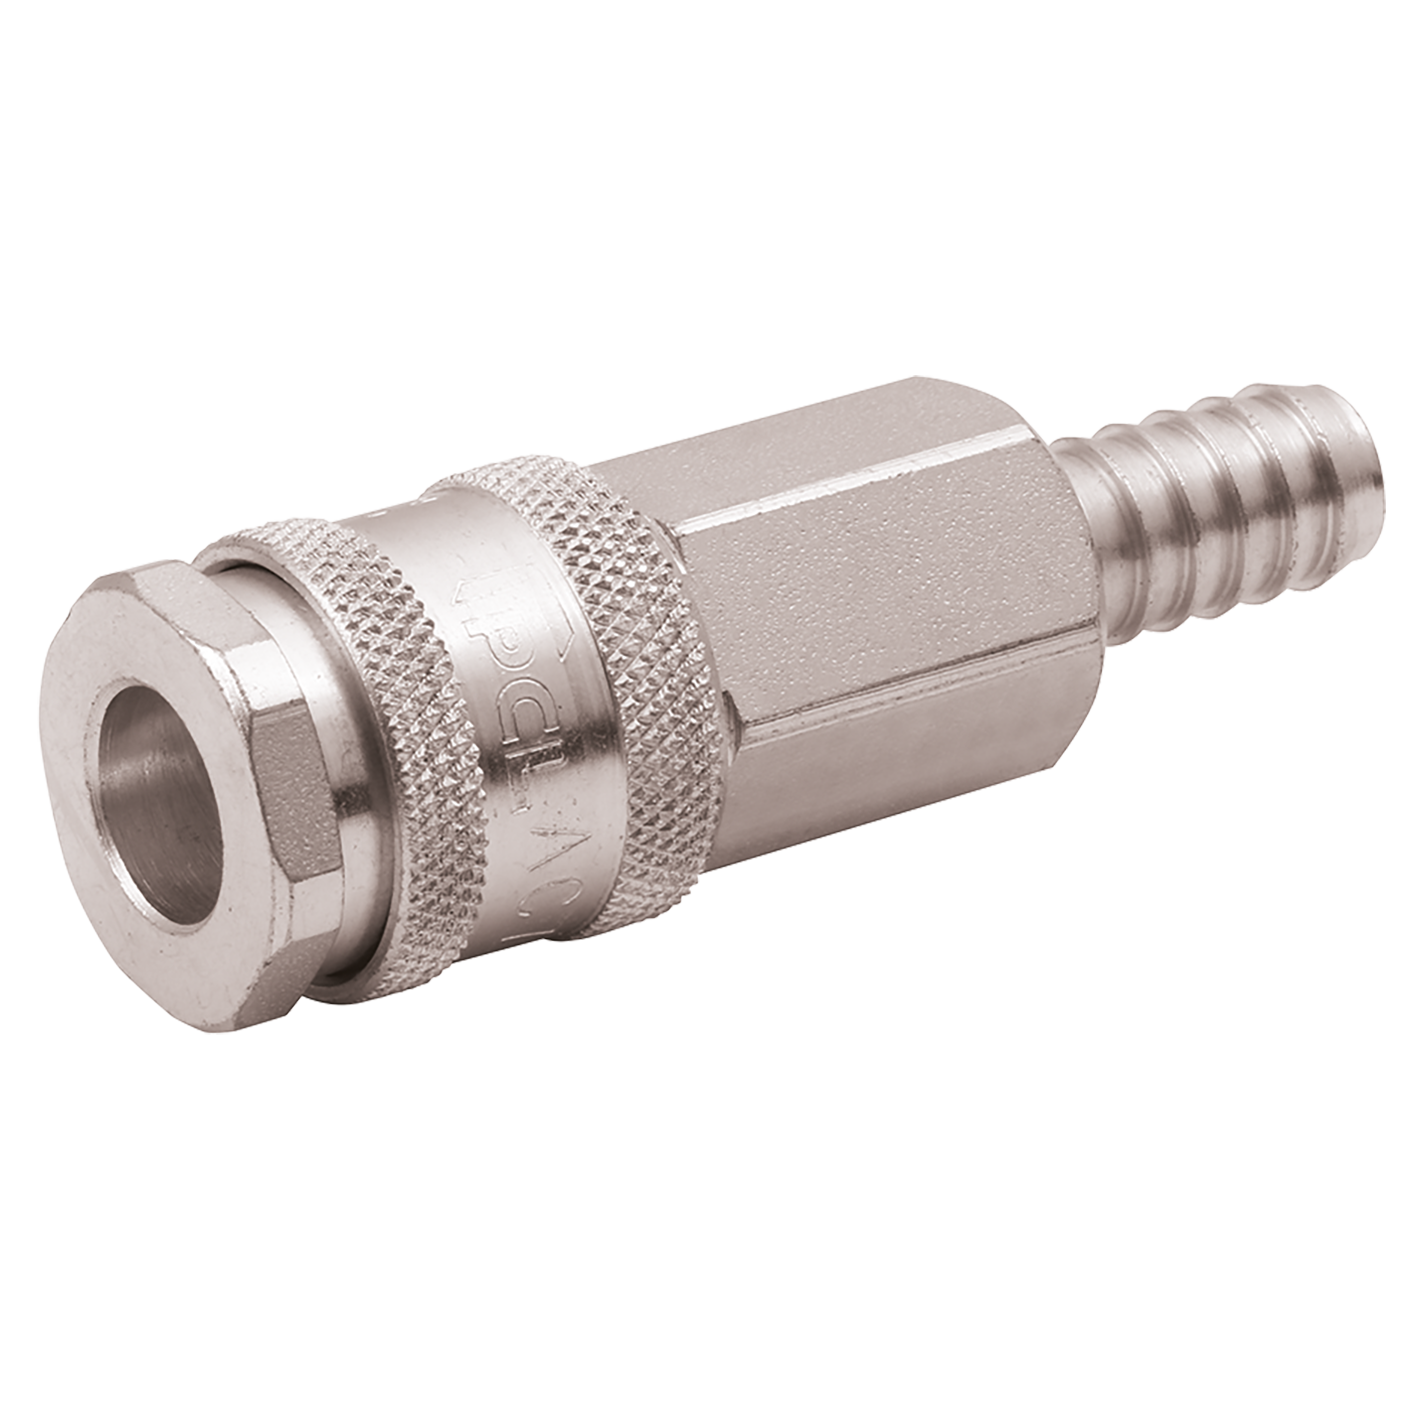 6MM H.TAIL PCL ISO B12 COUPLING